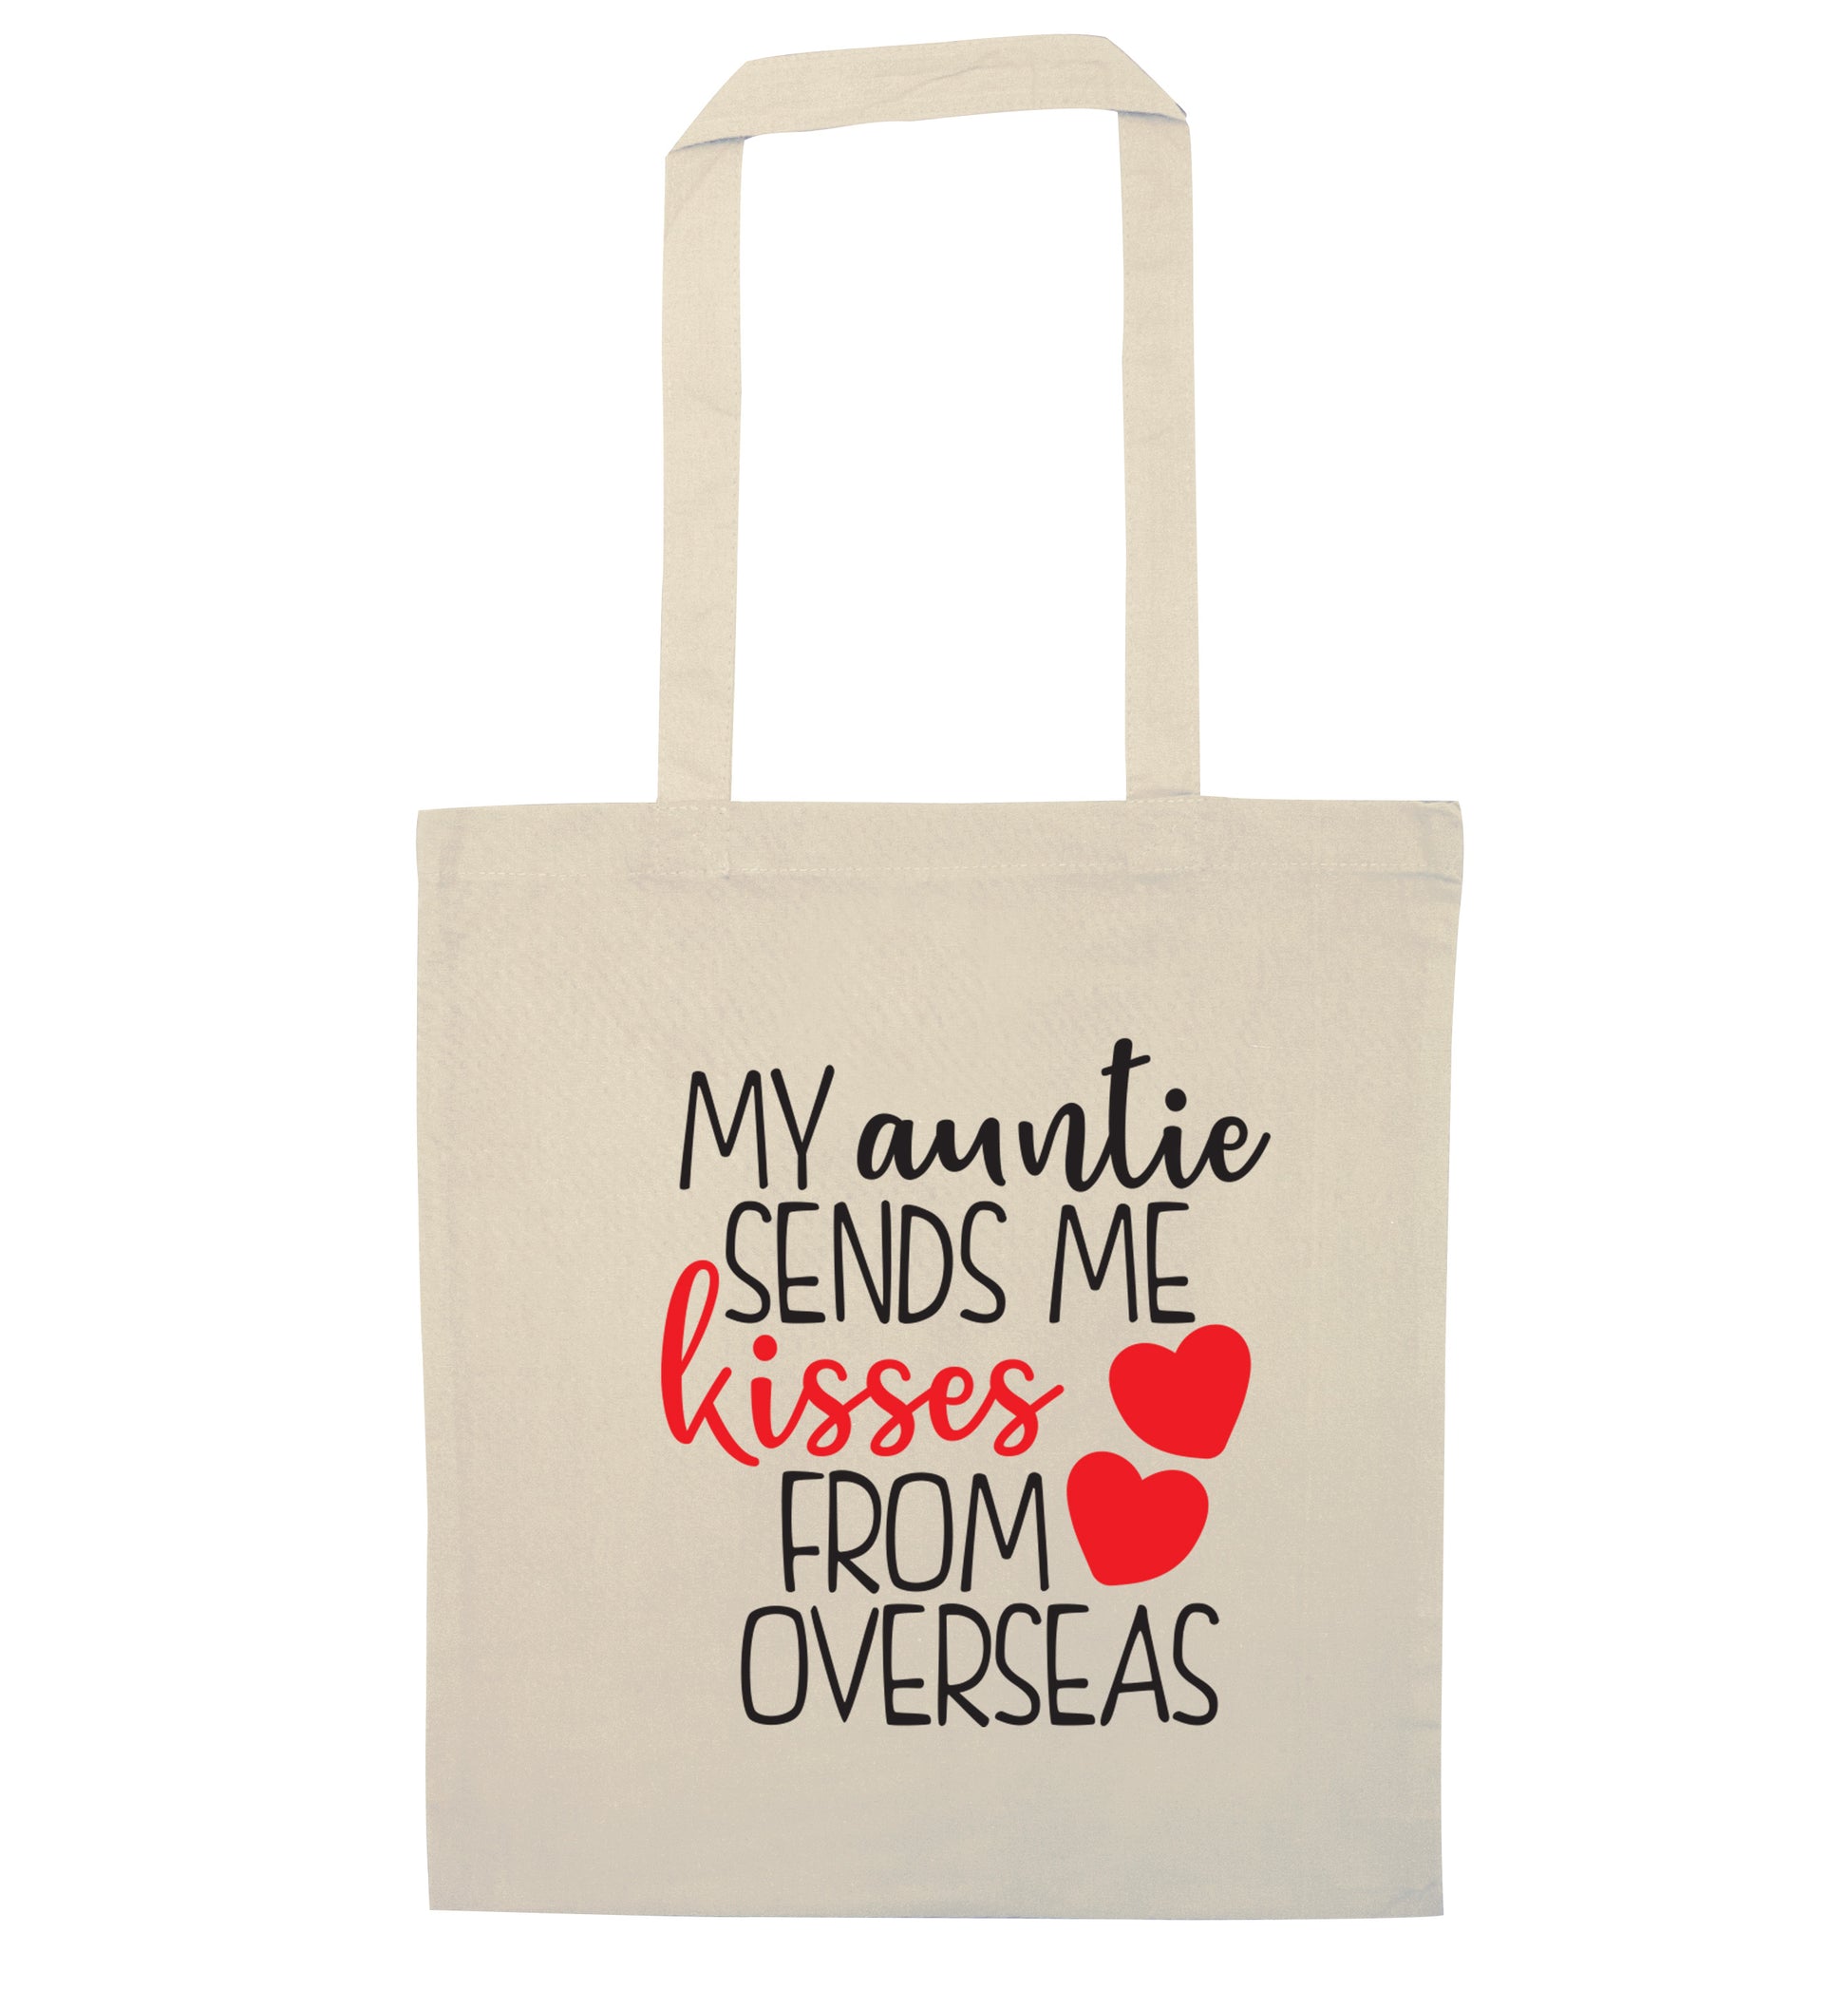 My auntie sends me kisses from overseas natural tote bag